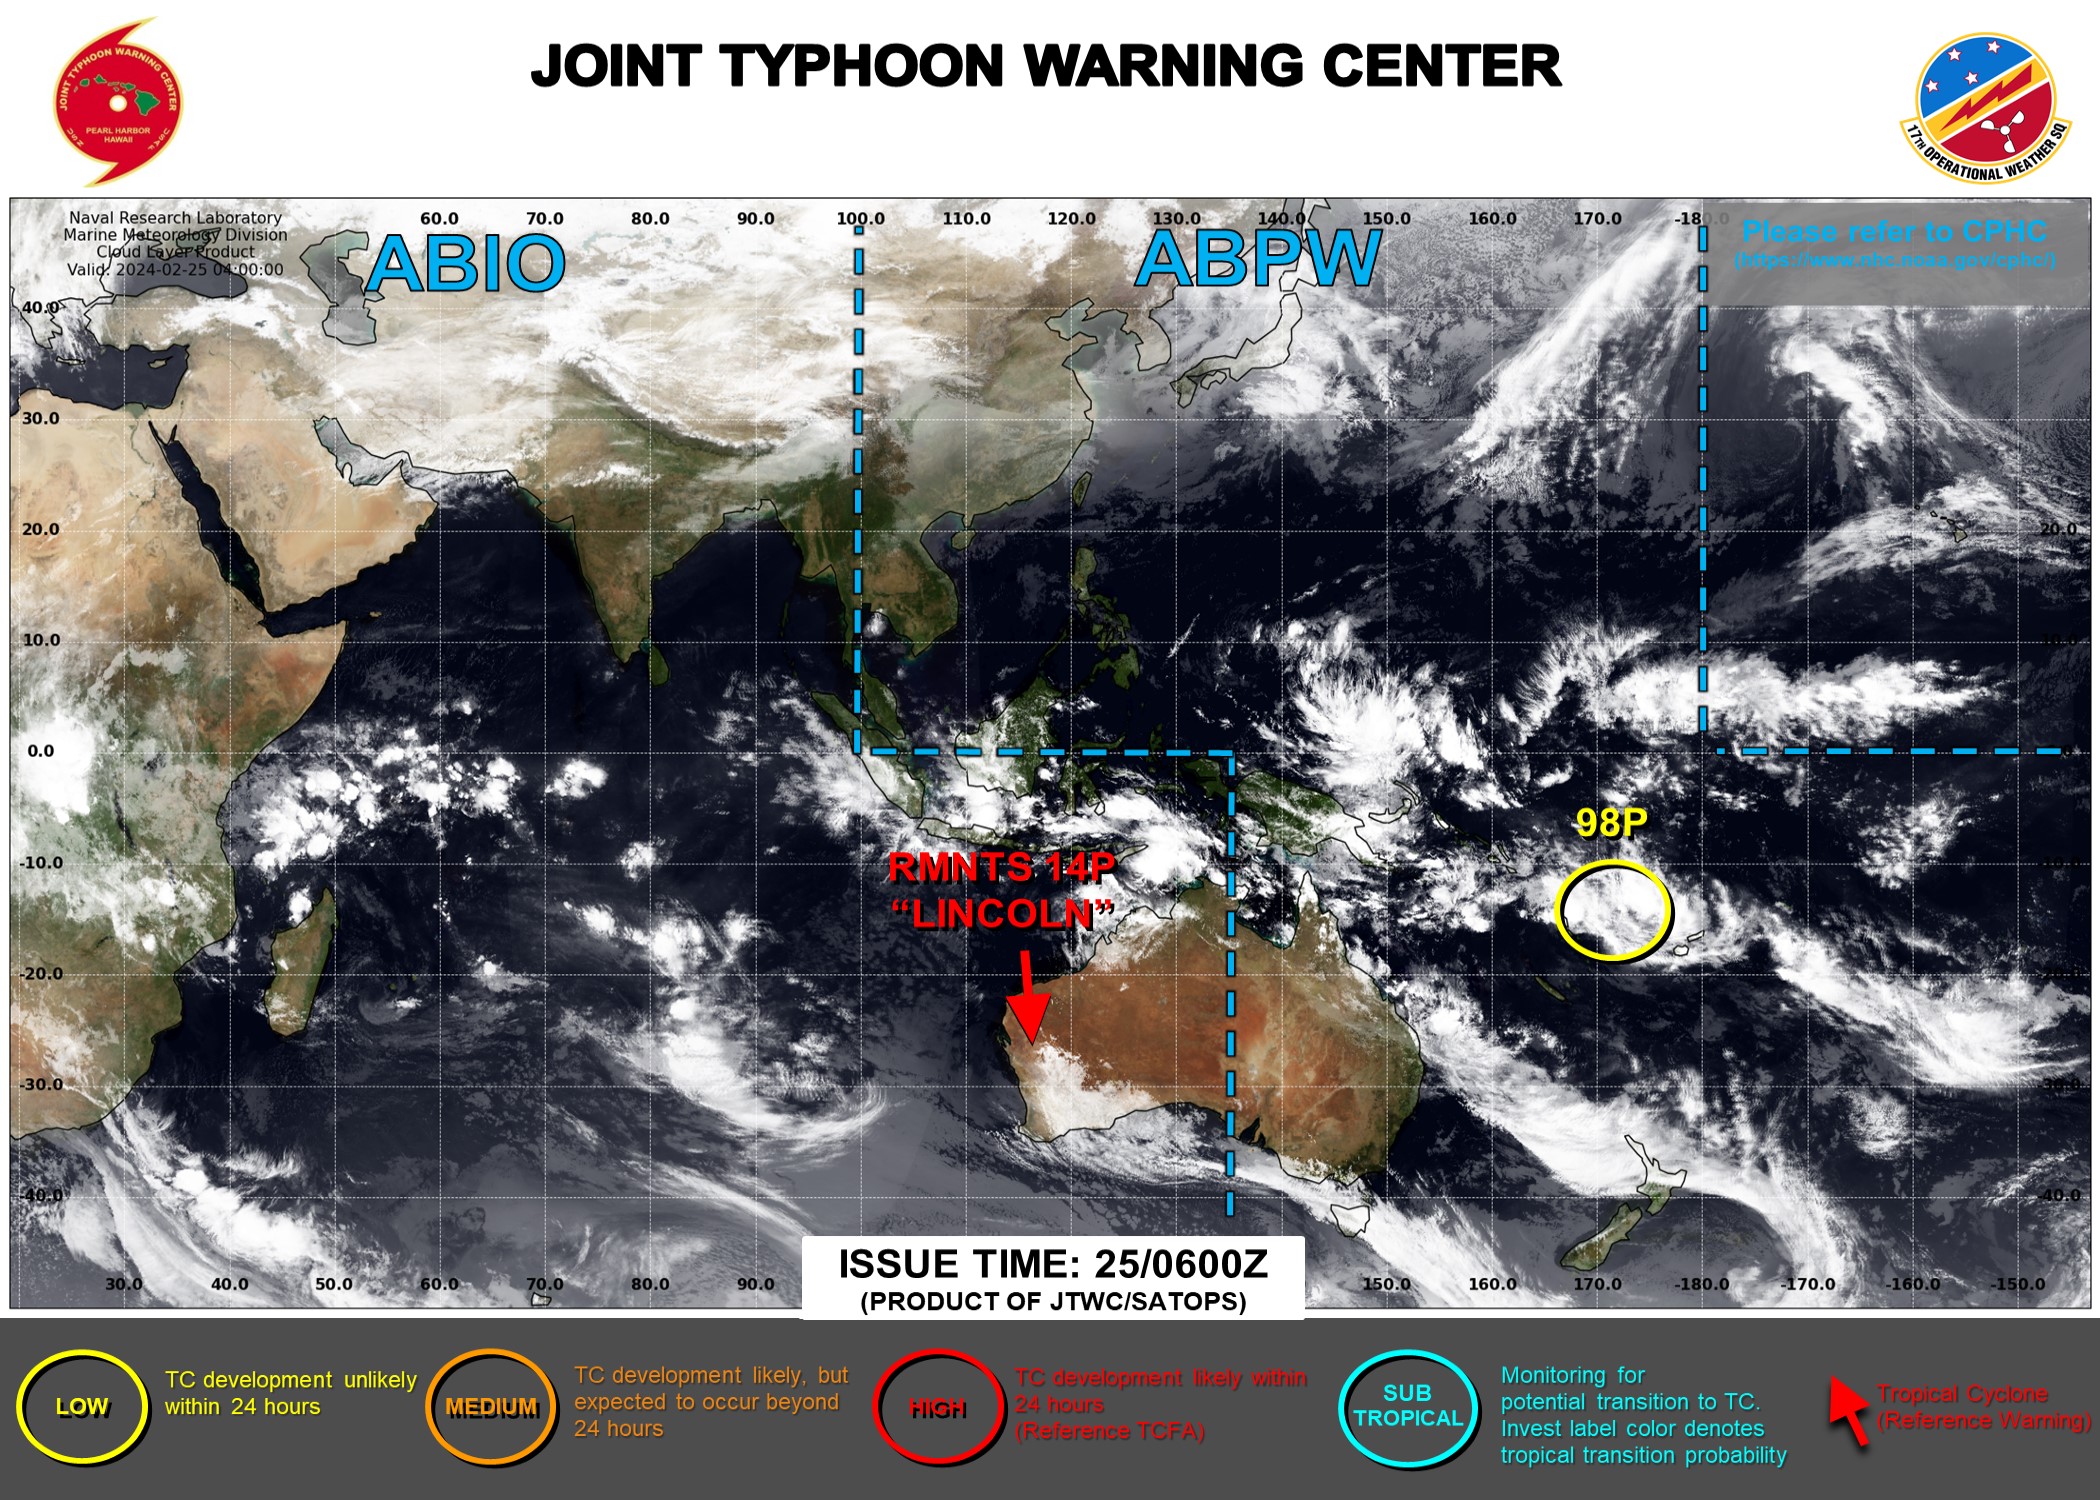 JTWC IS ISSUING 3HOURLY SATELLITE BULLETINS ON THE REMNANTS OF TC 16S(ELEANOR)